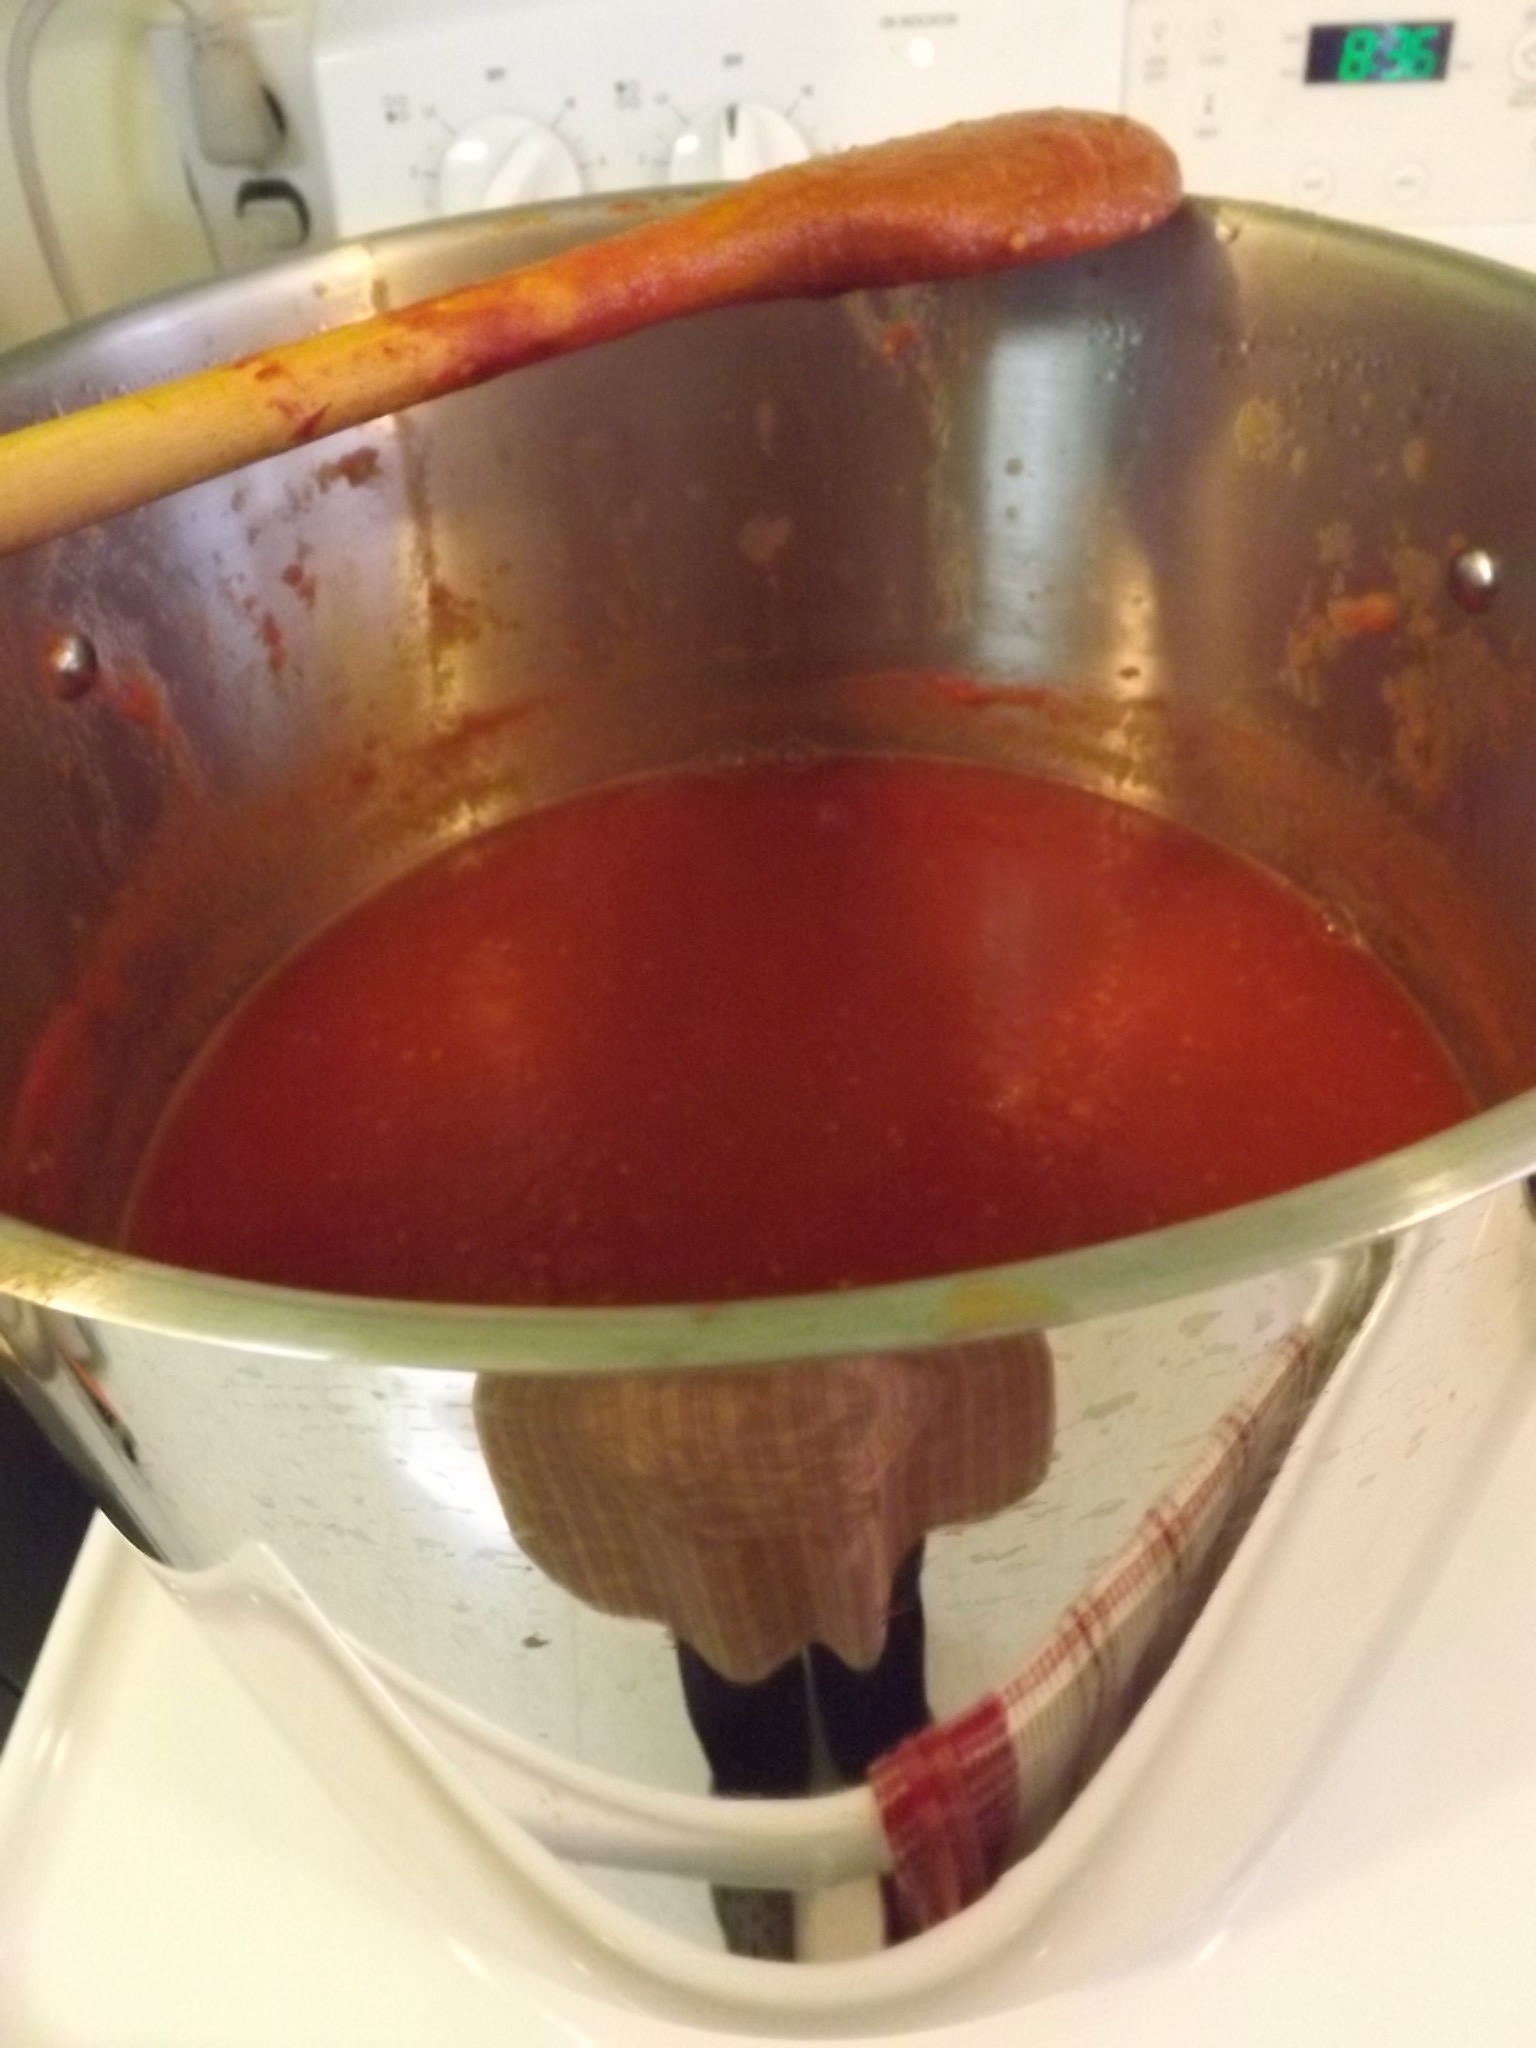 Stock pot containing tomato sauce, with reflection of Maggie's legs.